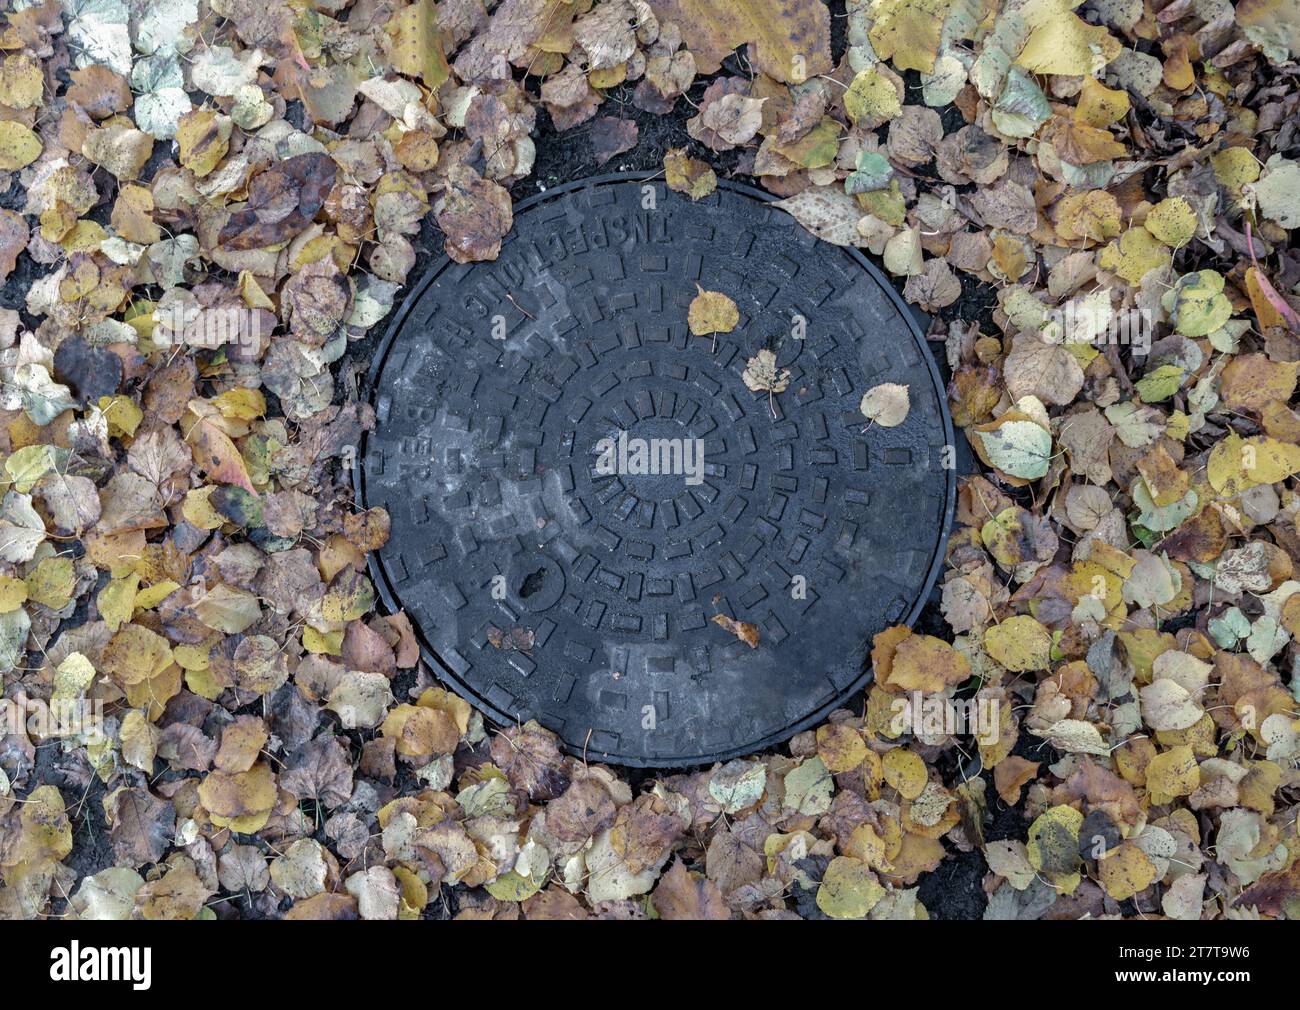 London, UK - Nov 05, 2023 - Inspection chamber or manhole of a sewerage system among leaves fall in park. Round cast iron inspection cover, Metal manh Stock Photo